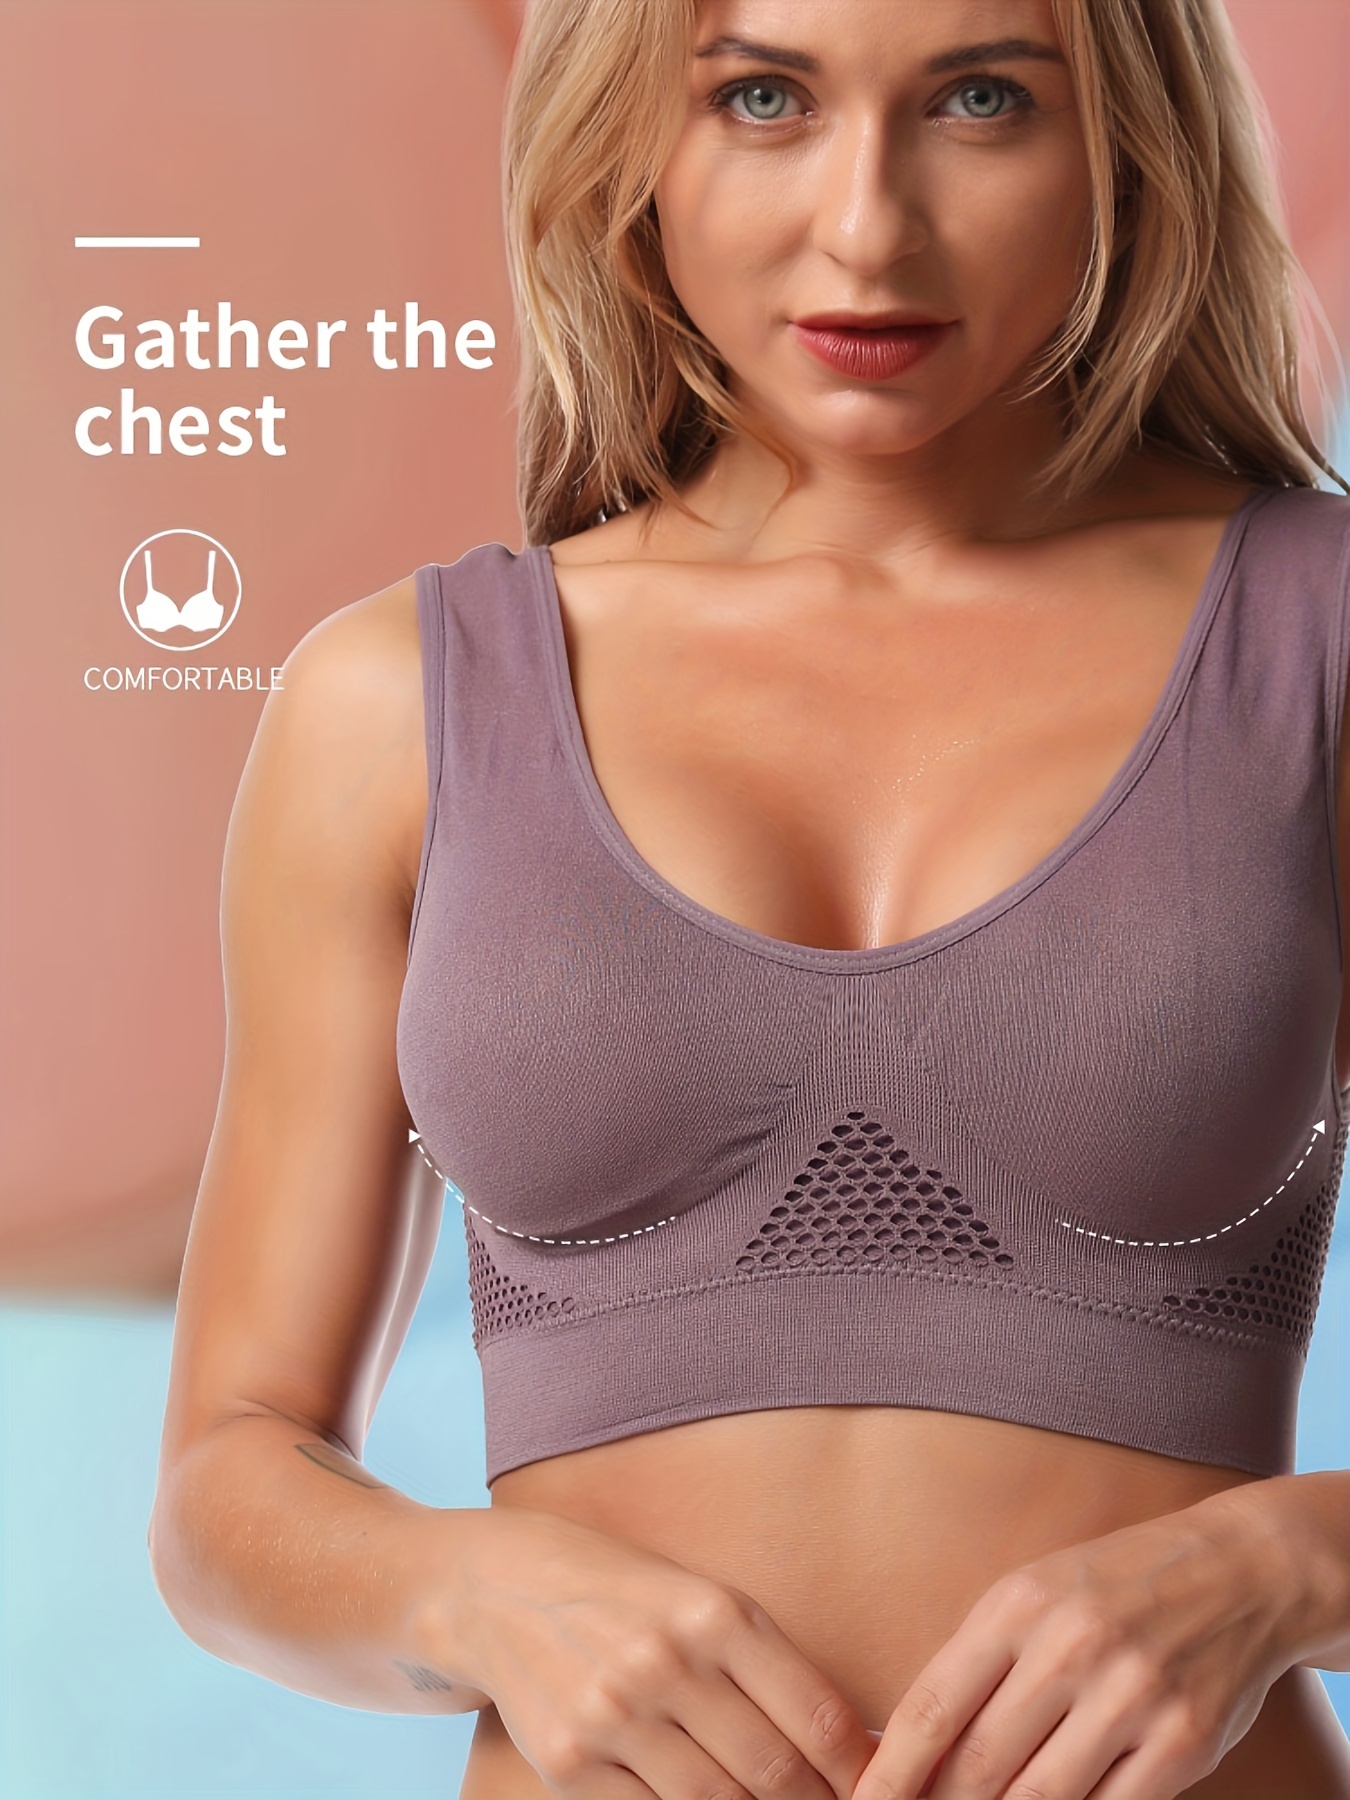 Seamless Plush Vest Sleep Padded Bra Online For Autumn And Winter  Comfortable And Worn Outside With Chest Pad From Changkuku, $18.17